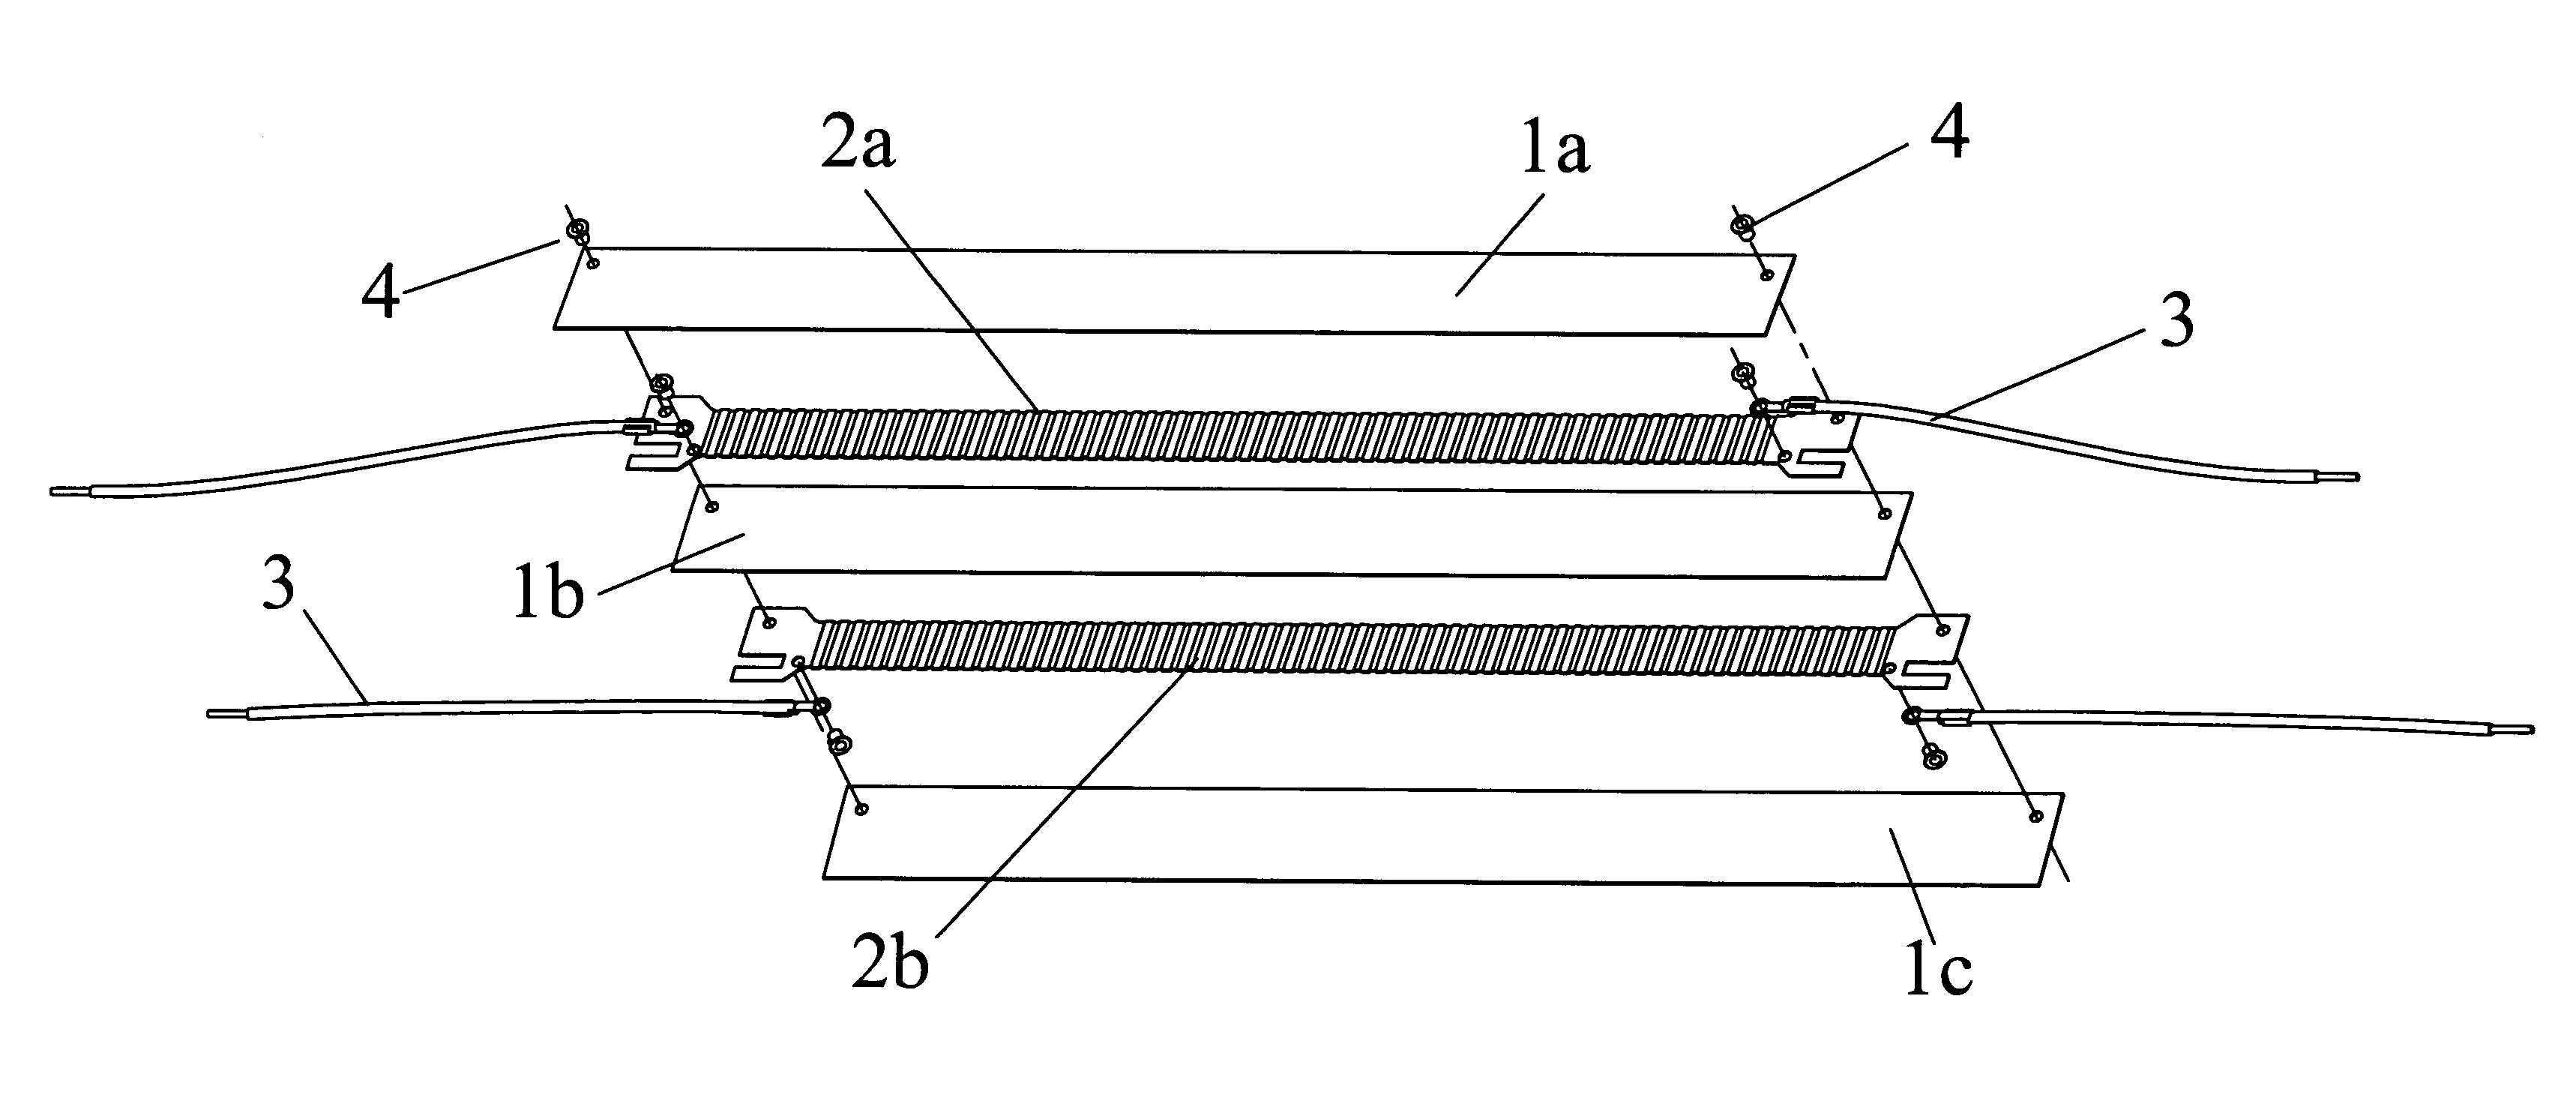 Heat element for maintaining laminator at predetermined working temperature